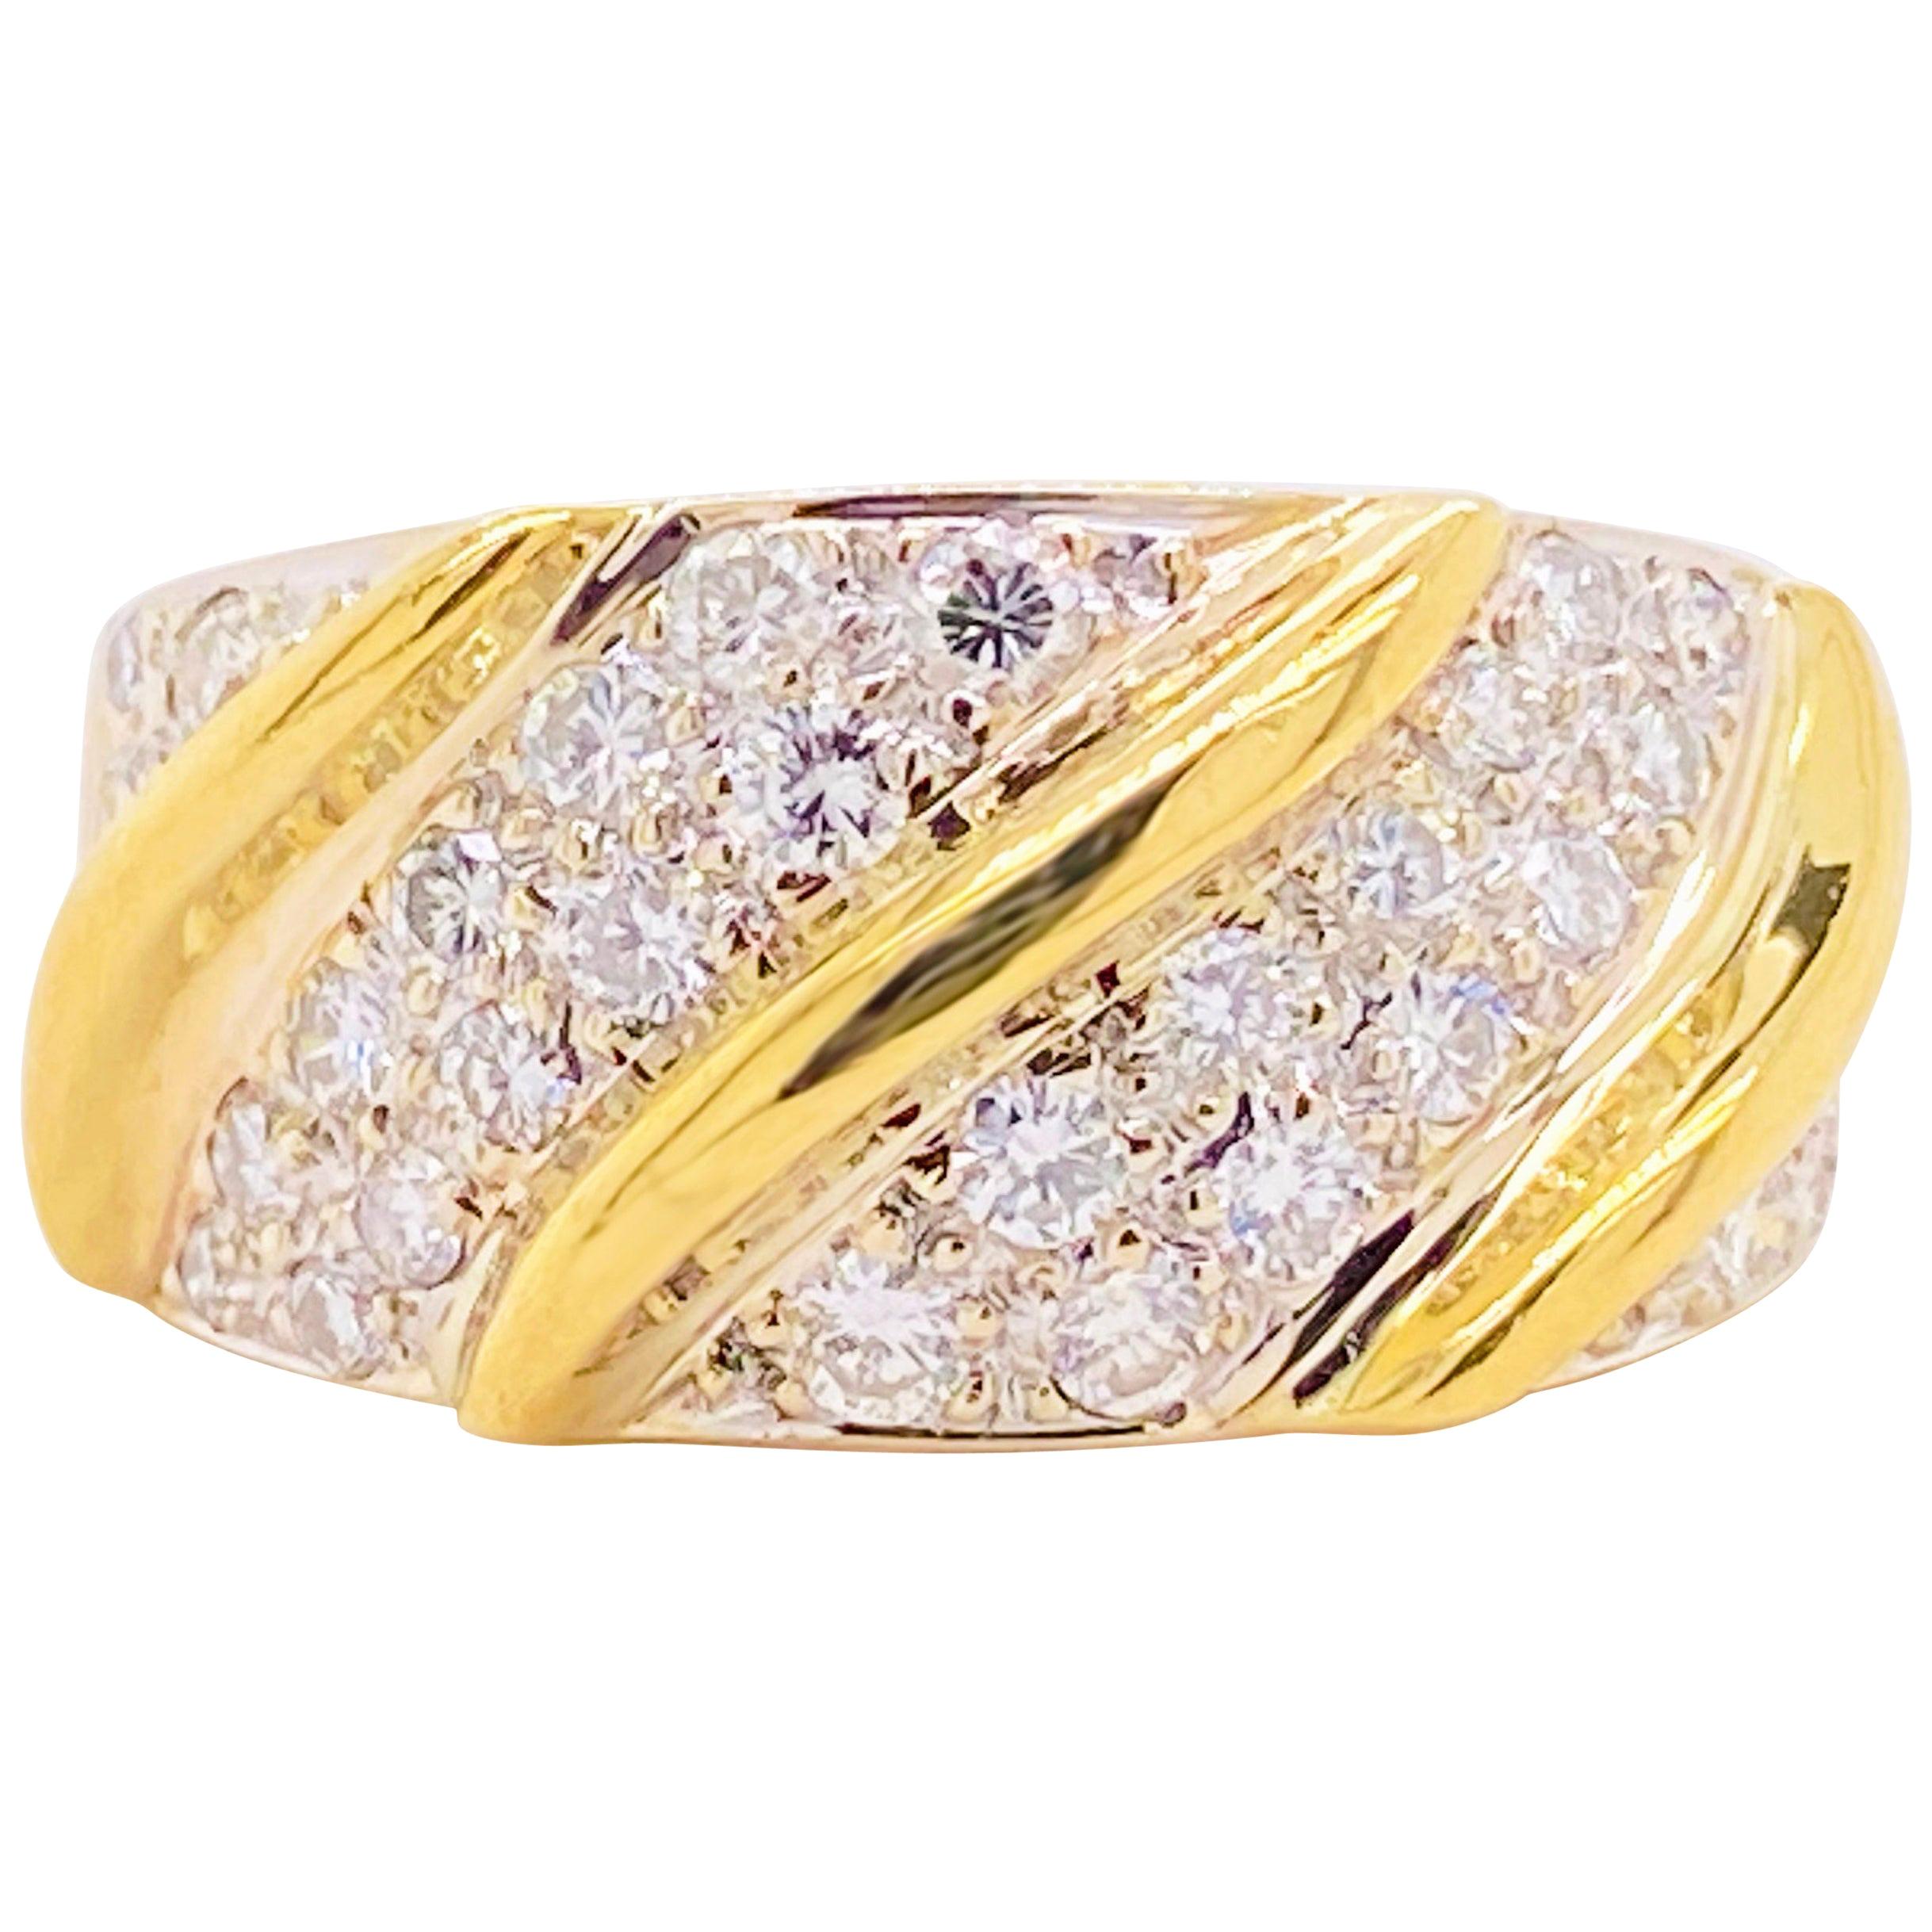 For Sale:  Wide Diamond Band, Yellow Gold, Bombe, Twisted Band, Pave Diamonds